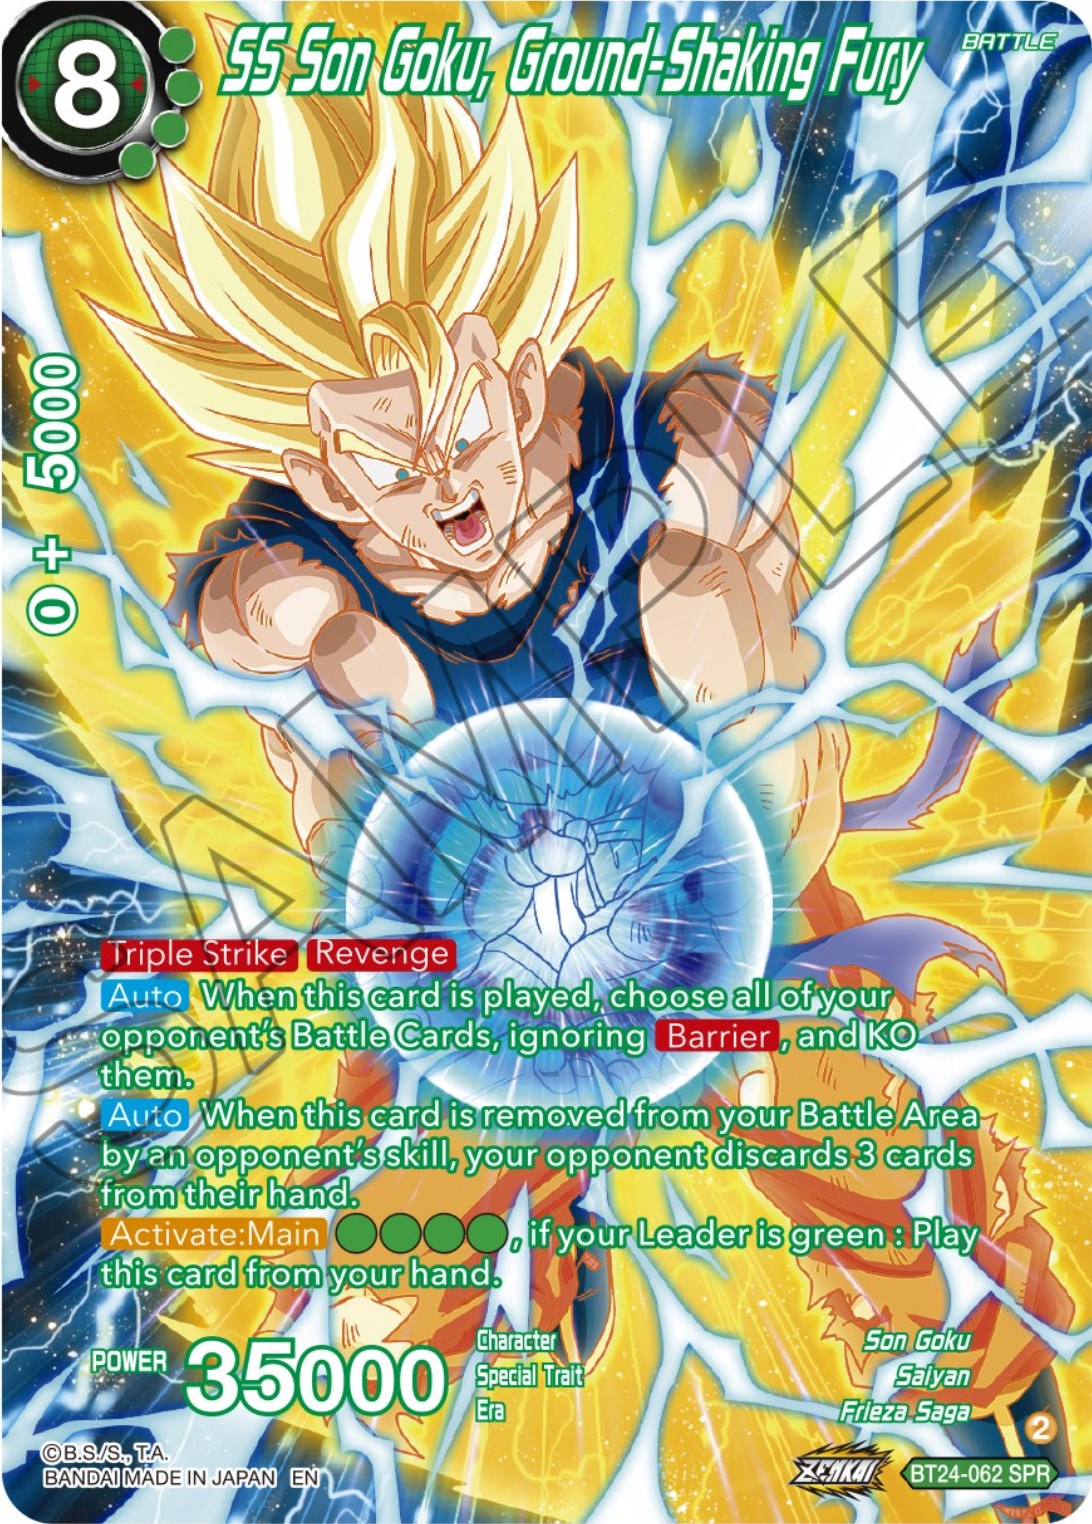 SS Son Goku, Ground-Shaking Fury (SPR) (BT24-062) [Beyond Generations] | The Time Vault CA